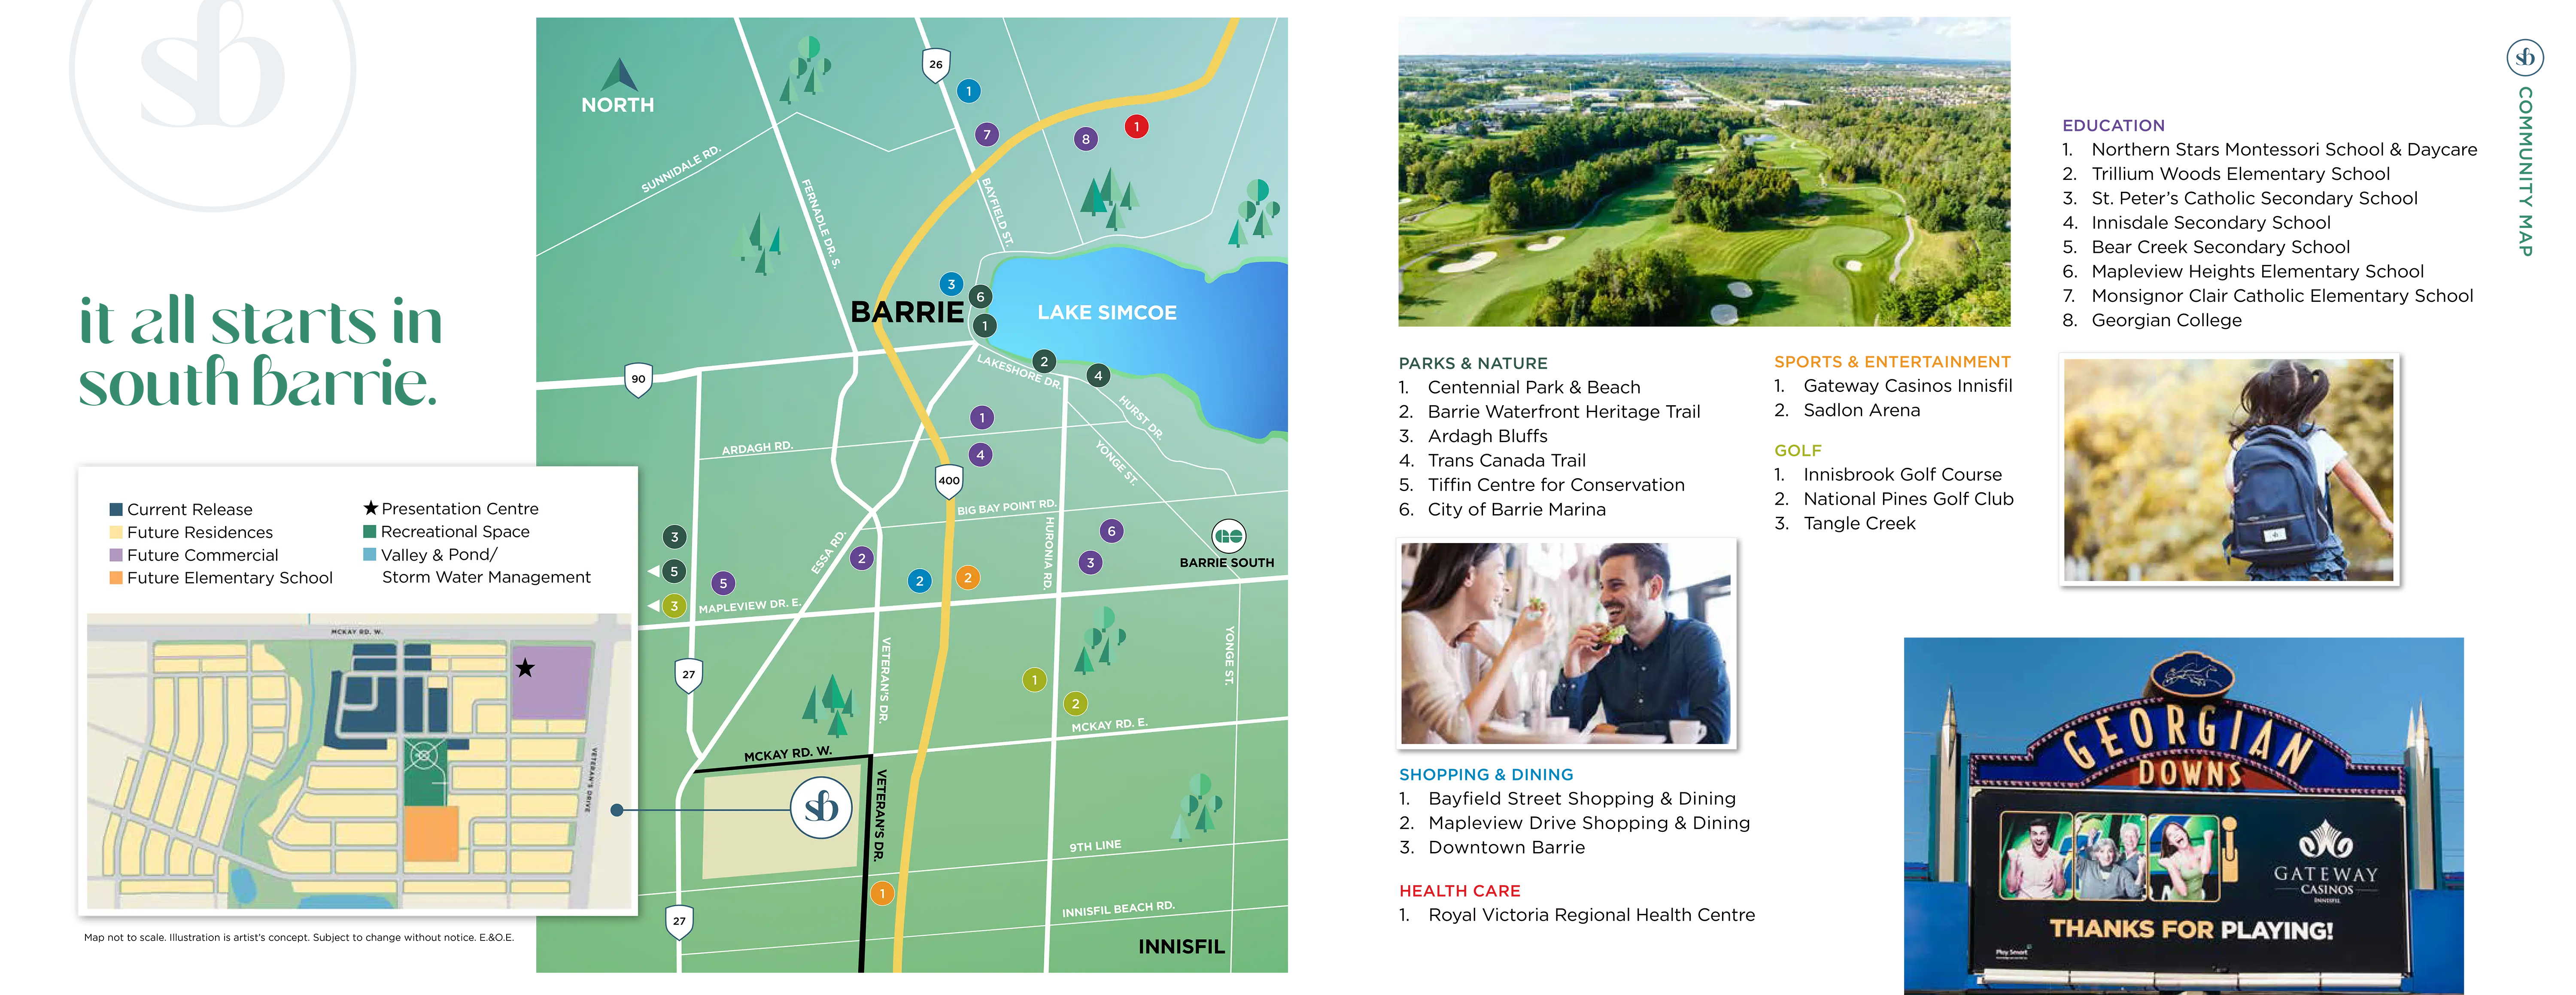 South Barrie Amenities Map